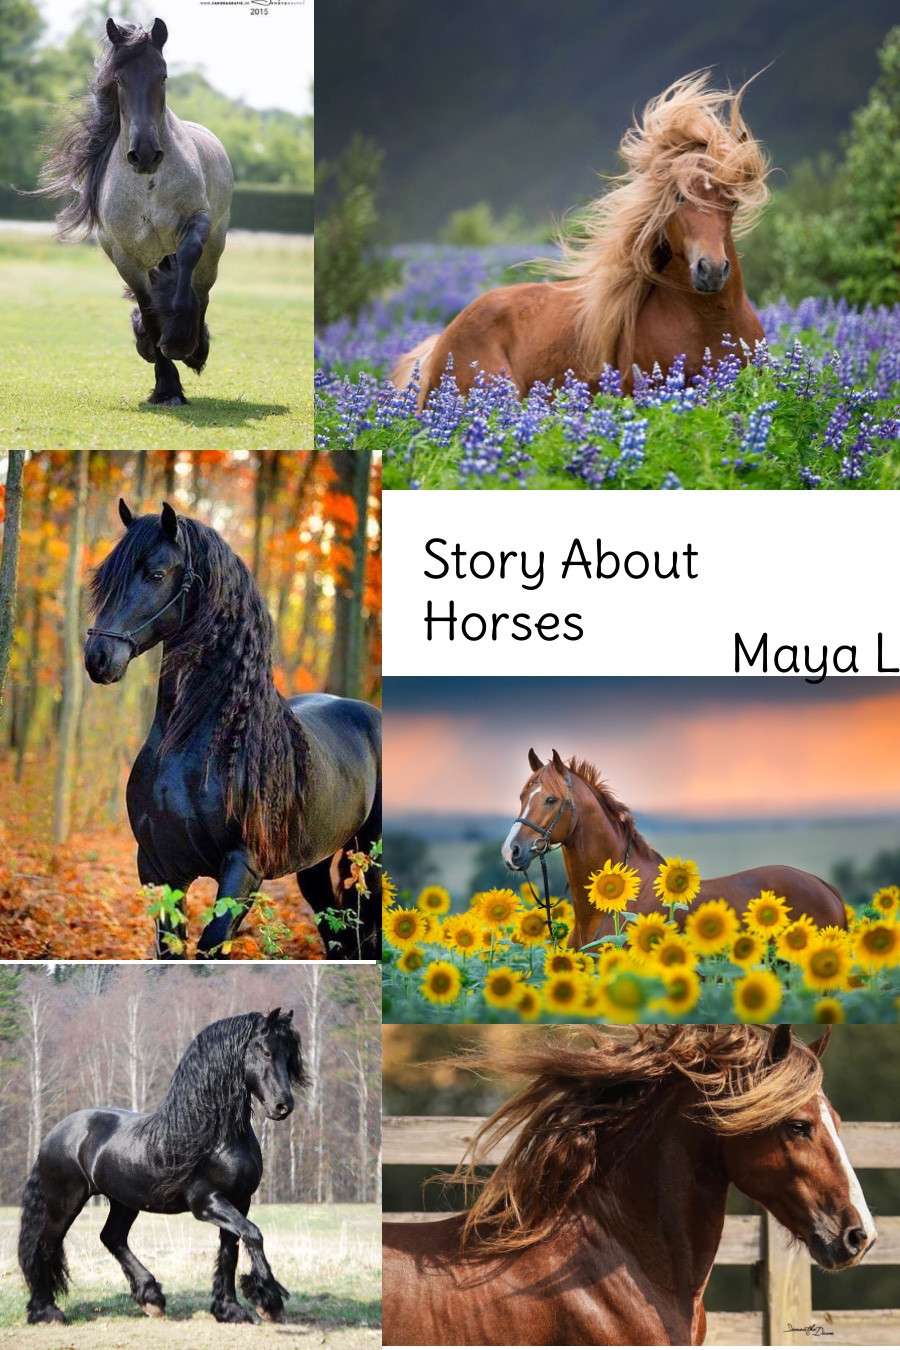 Storys About Horses by Maya L